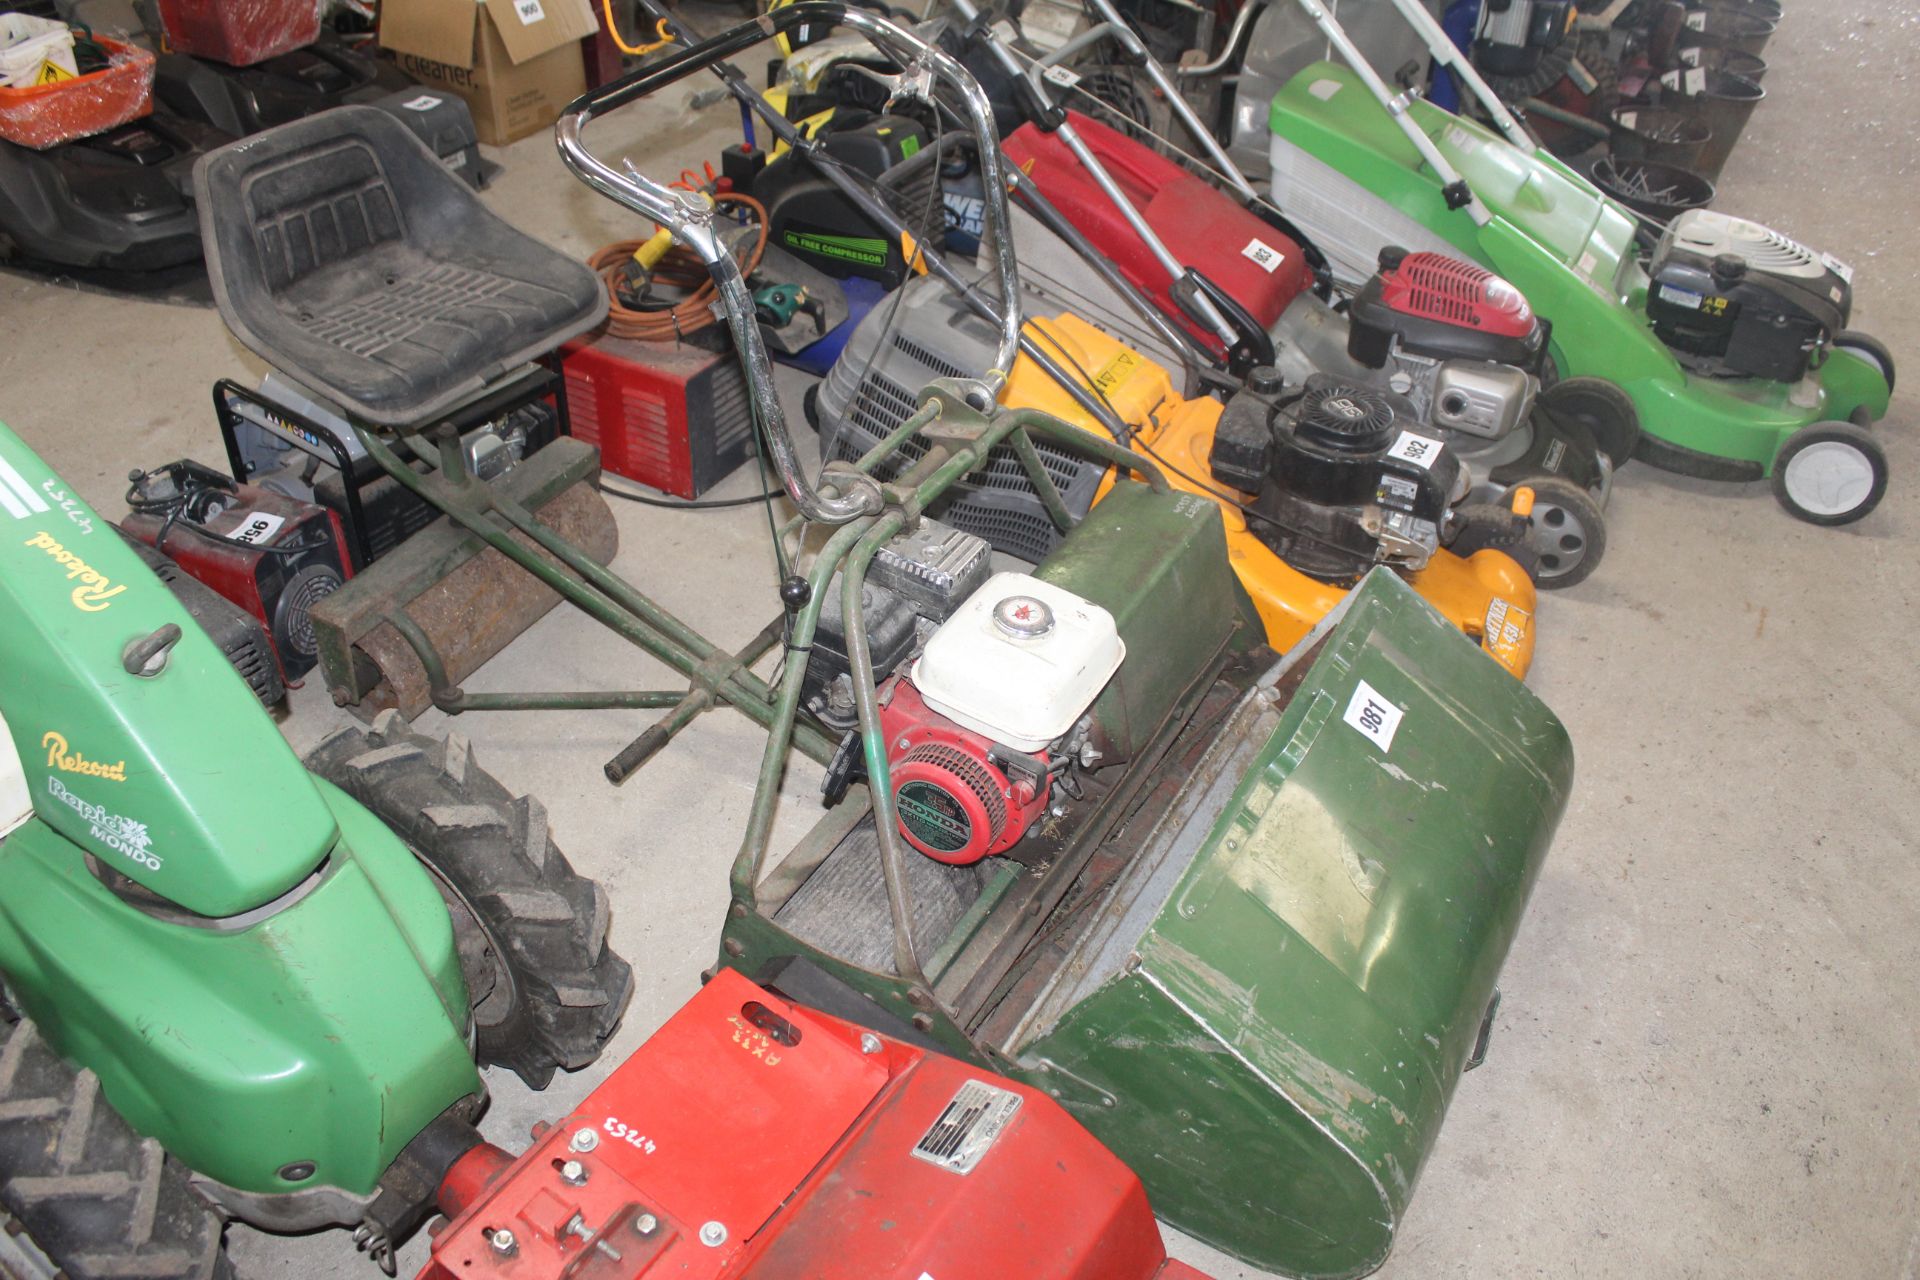 Atco B30 Royal lawn mower. With roller seat and grass box. From local deceased estate.